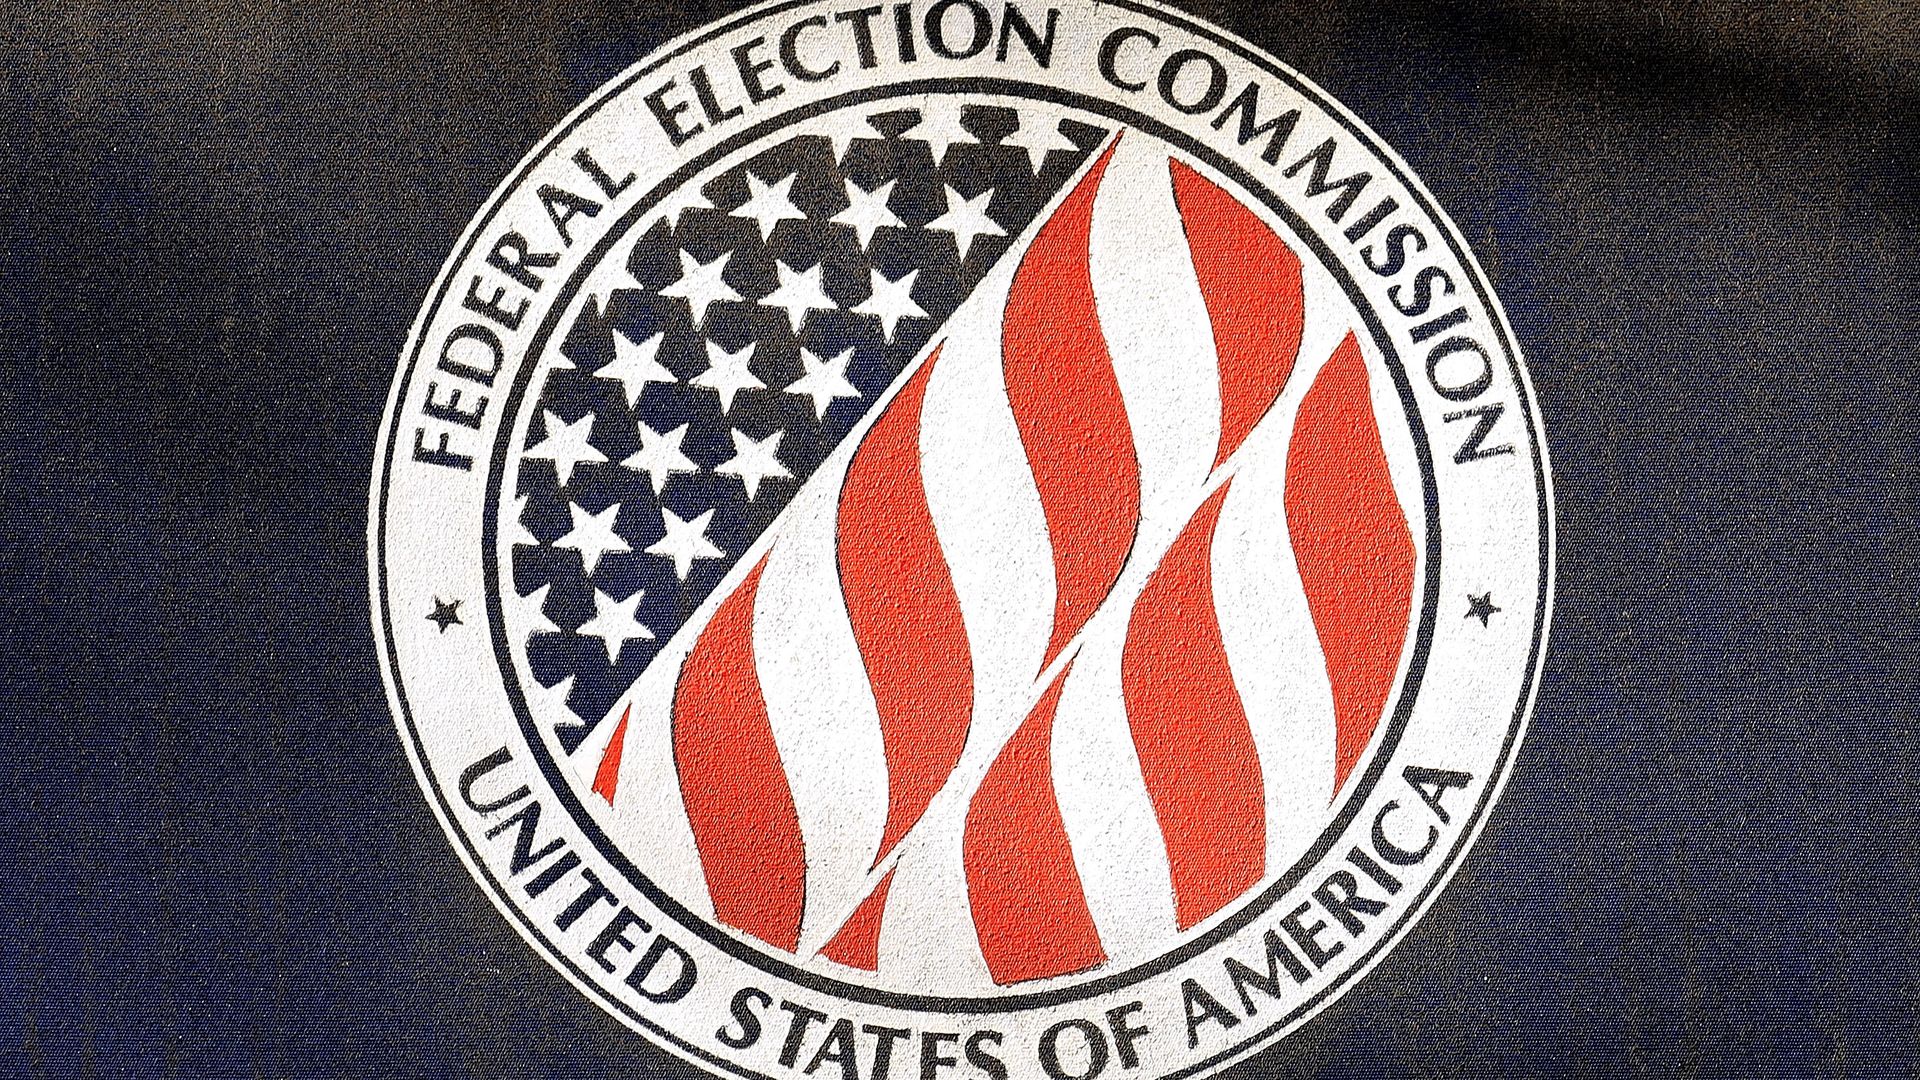 Picture of the Federal Election Commission seal